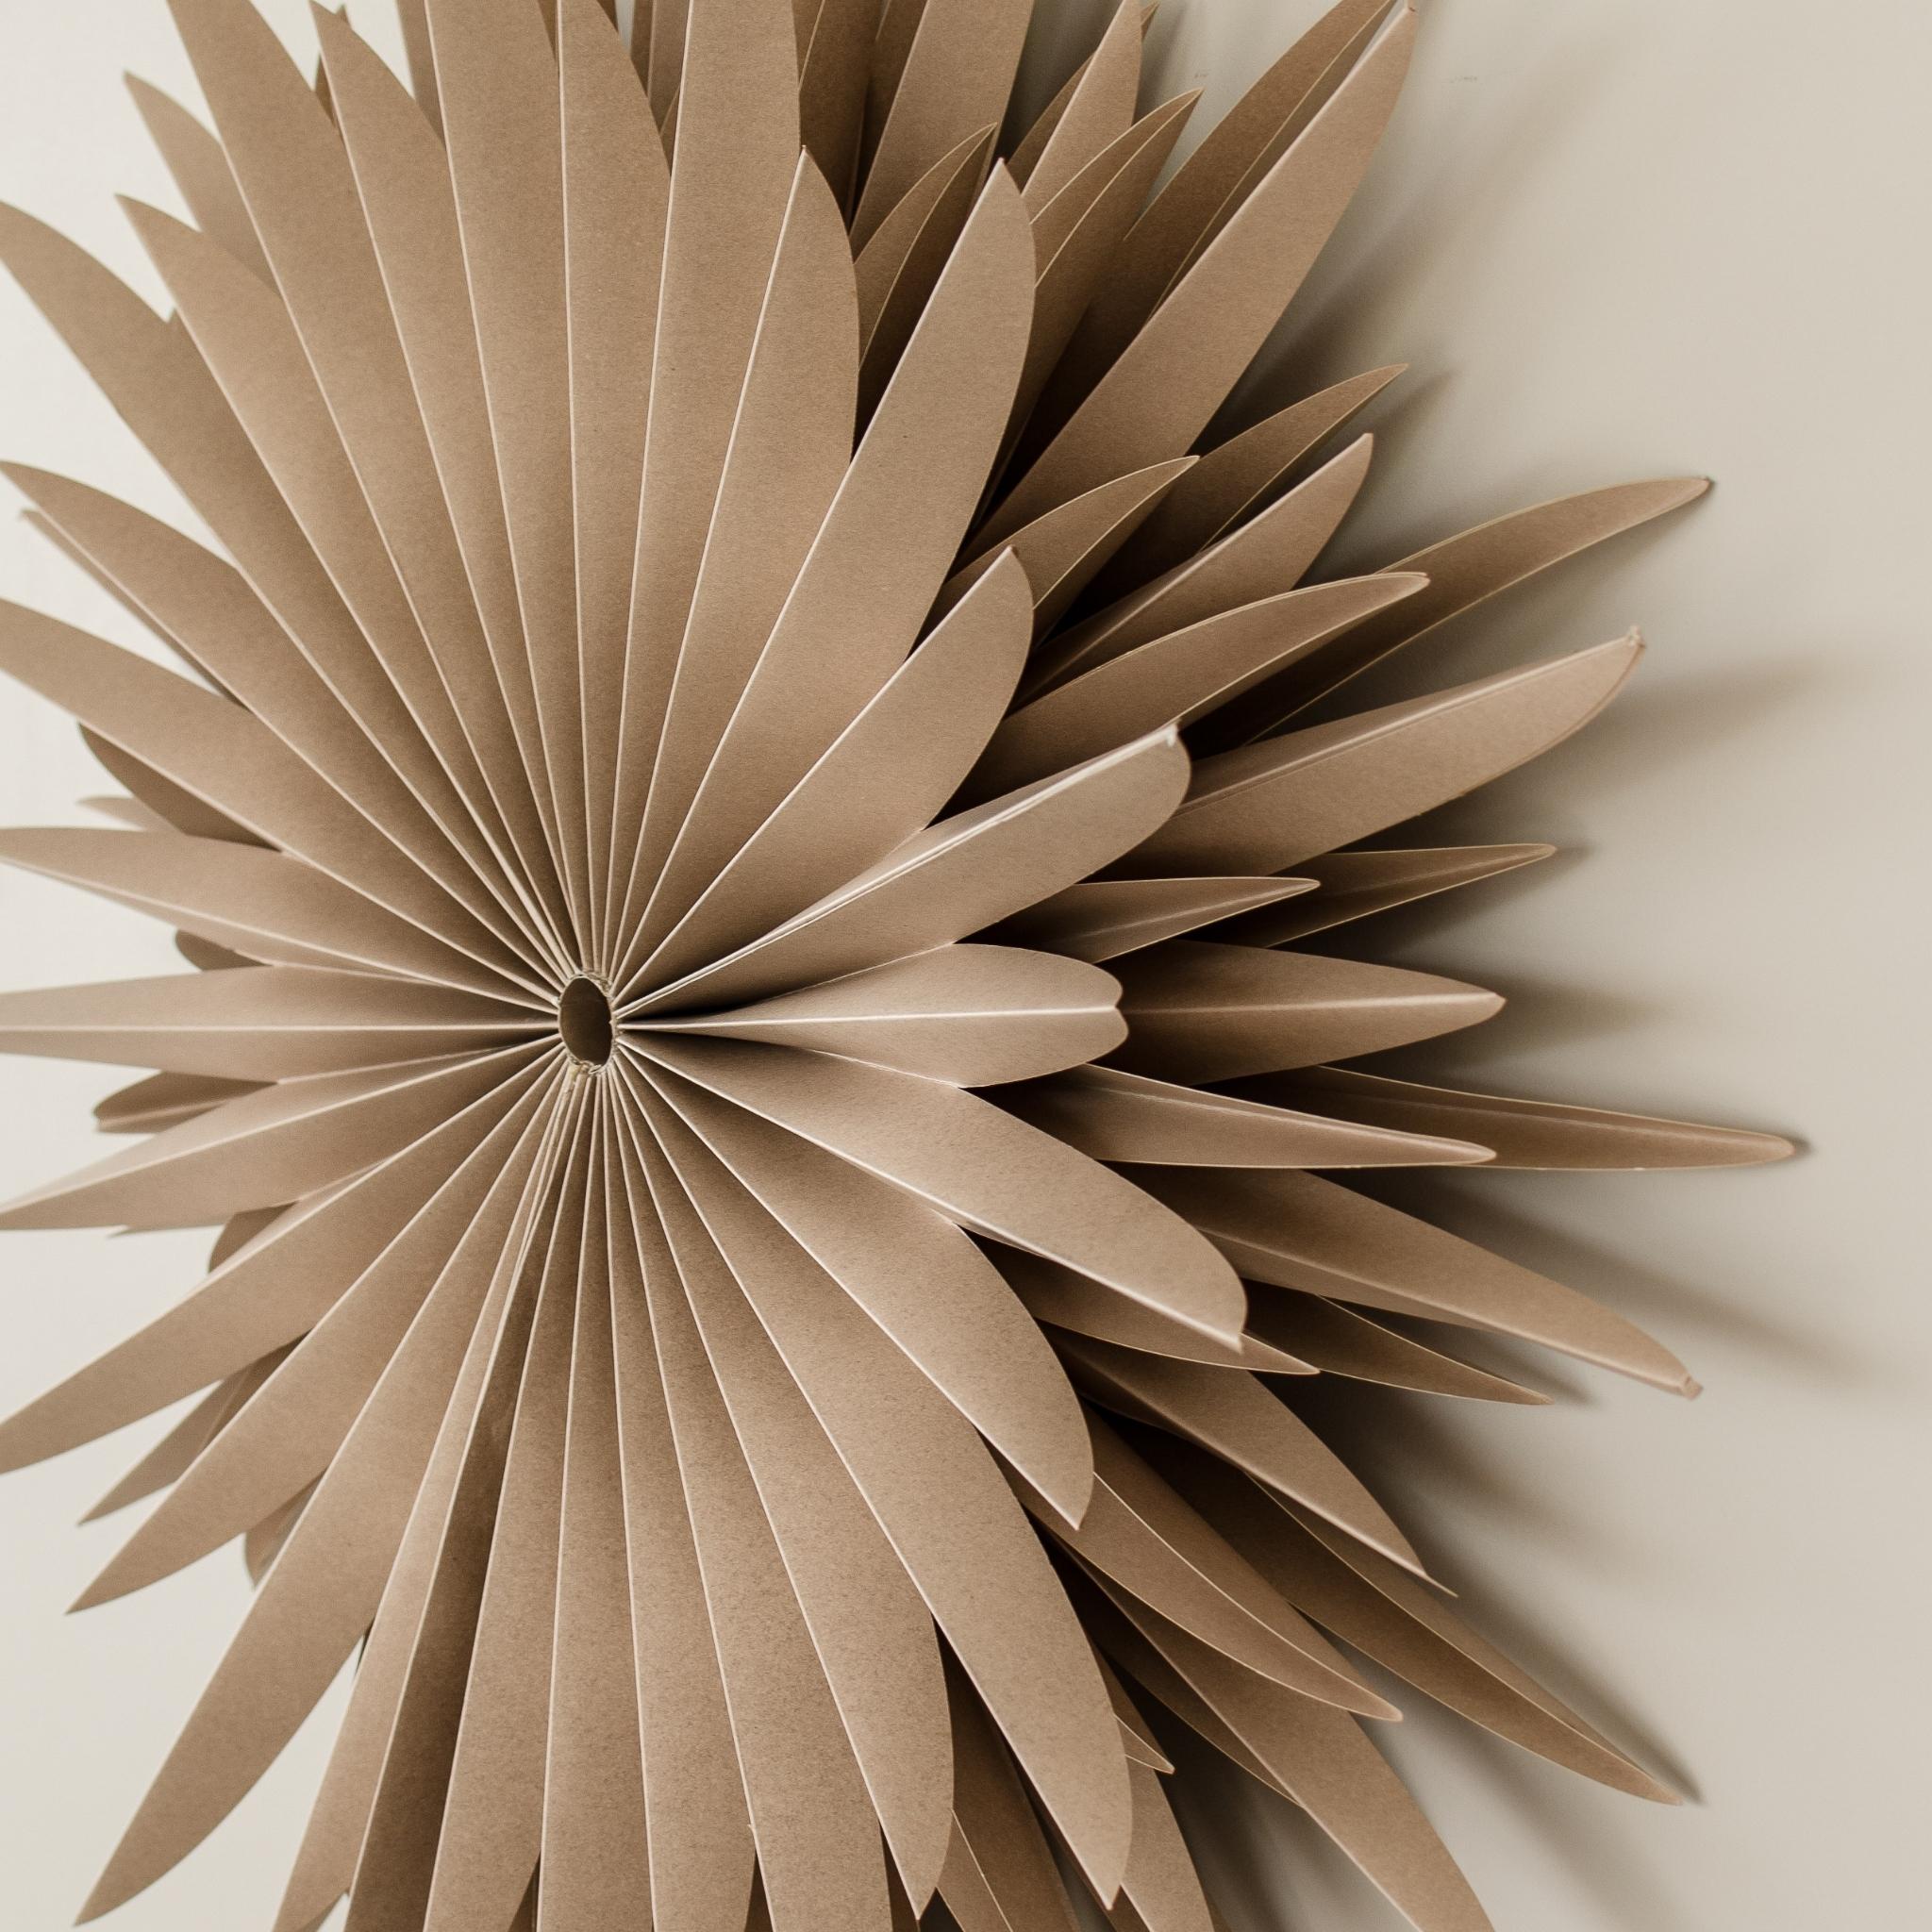 Almond Latte paper Star wall hanging in 70cm diameter hanging on a beige wall